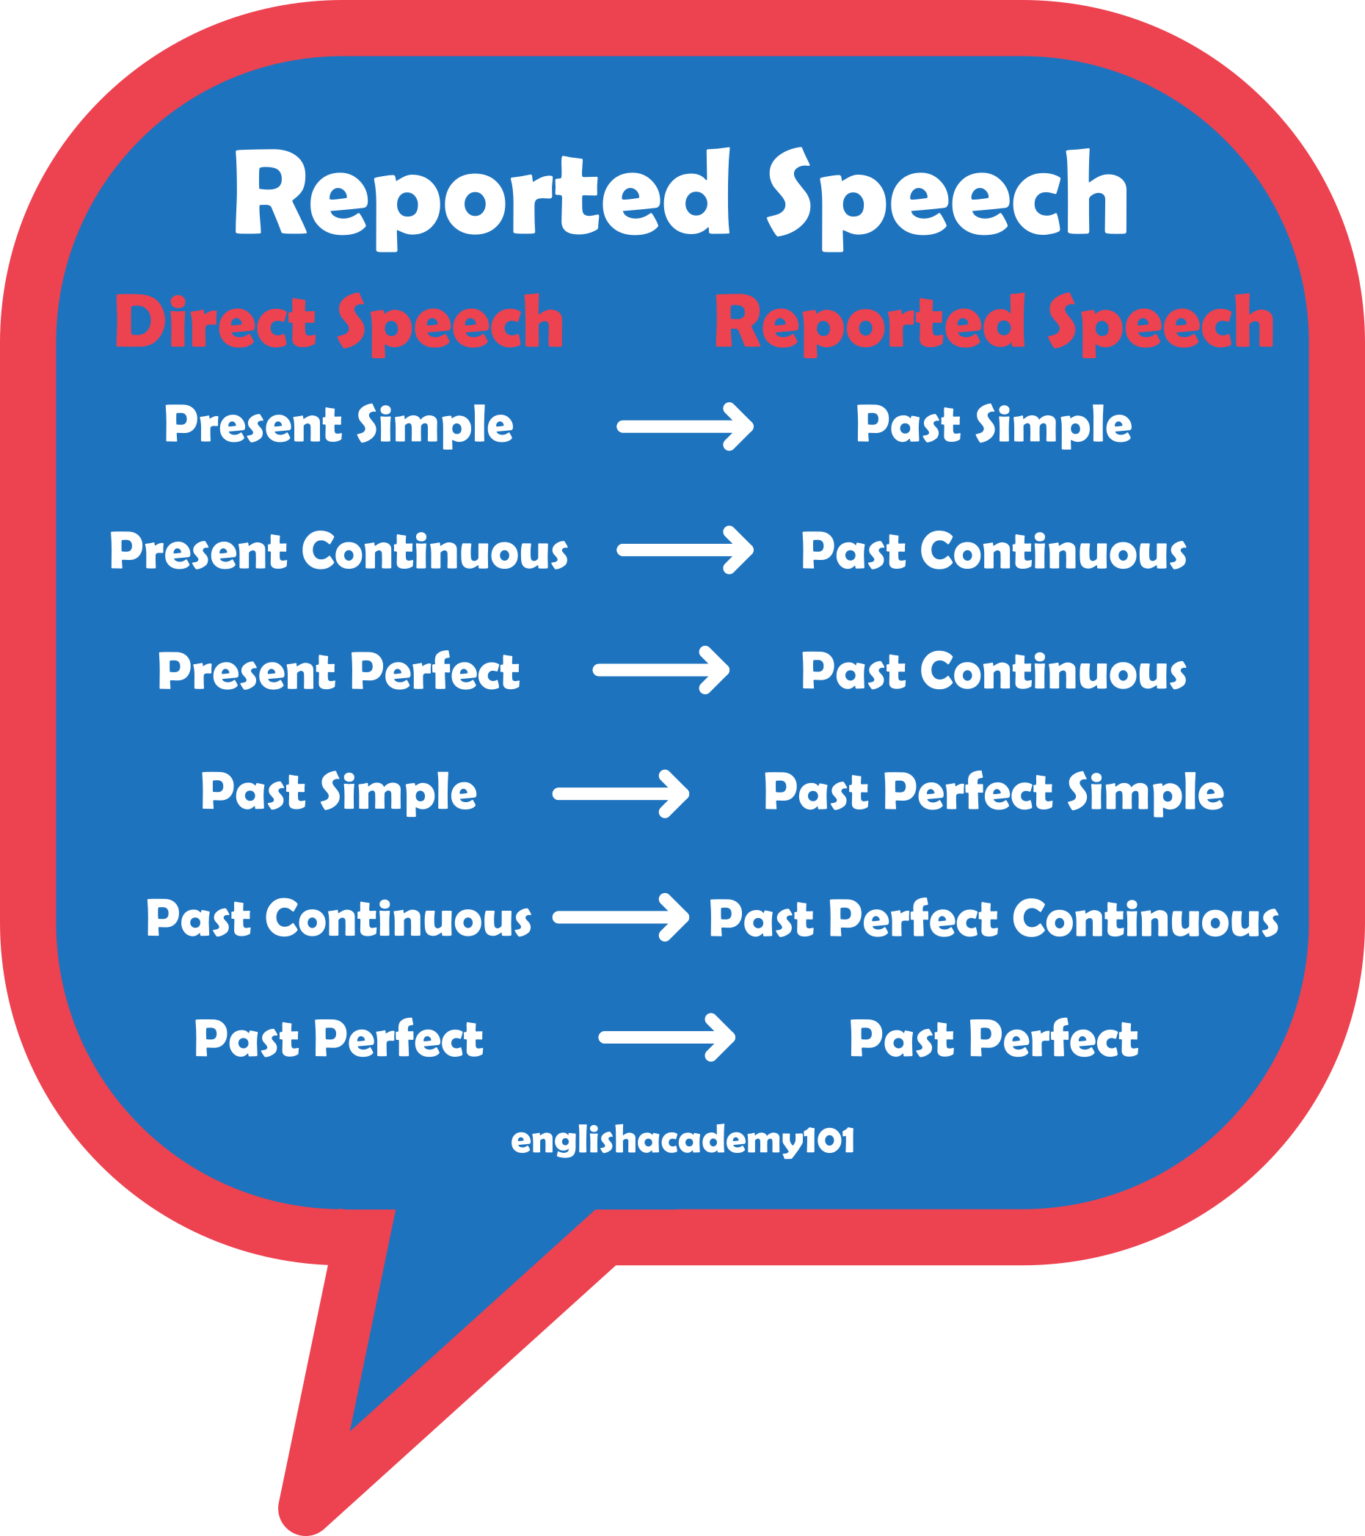 direct speech and reported speech present simple